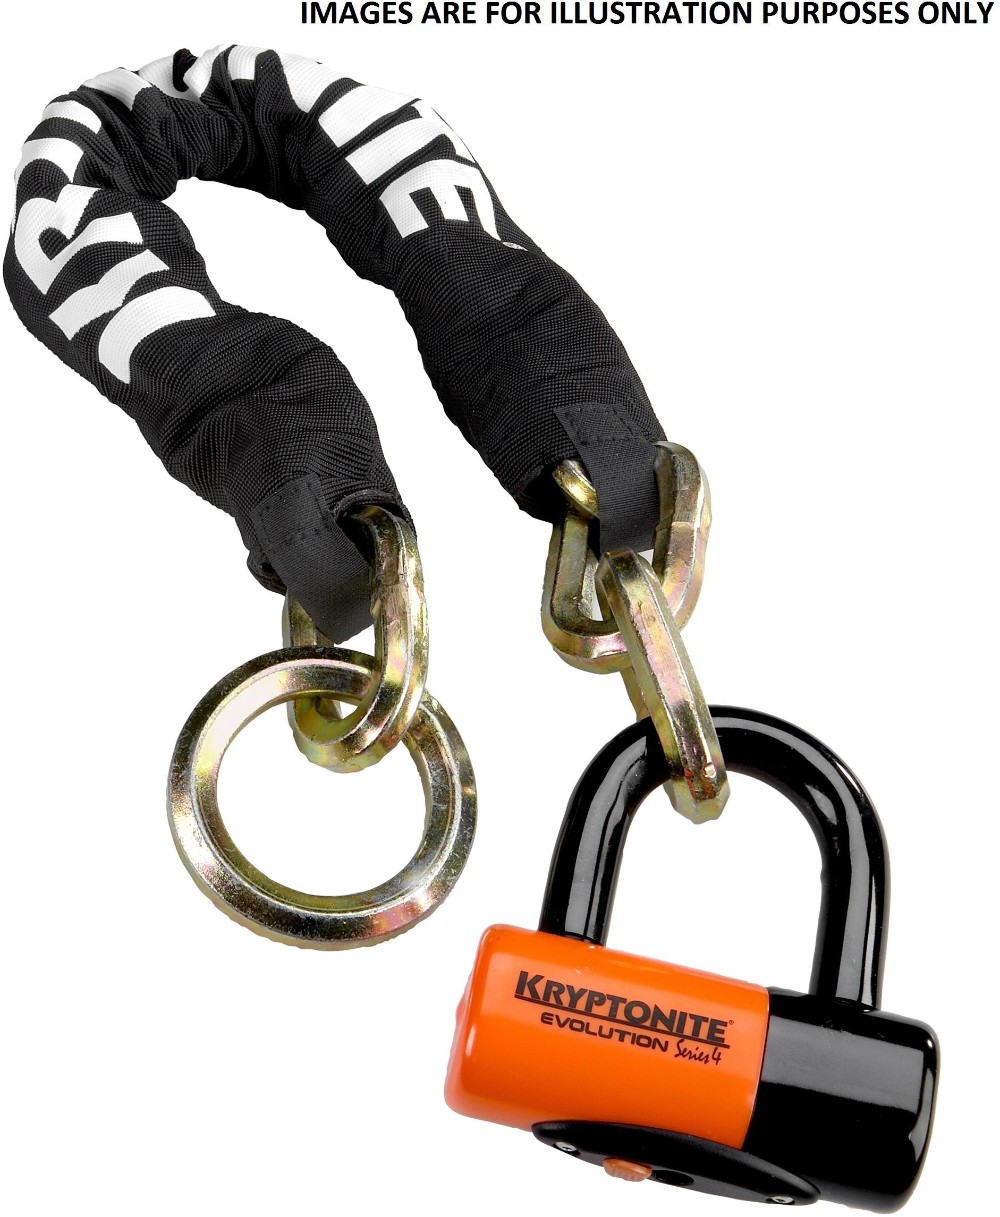 New York Noose 130cm Chain Lock With EV Series 4 Disc Lock - Sold Secure Gold image 0